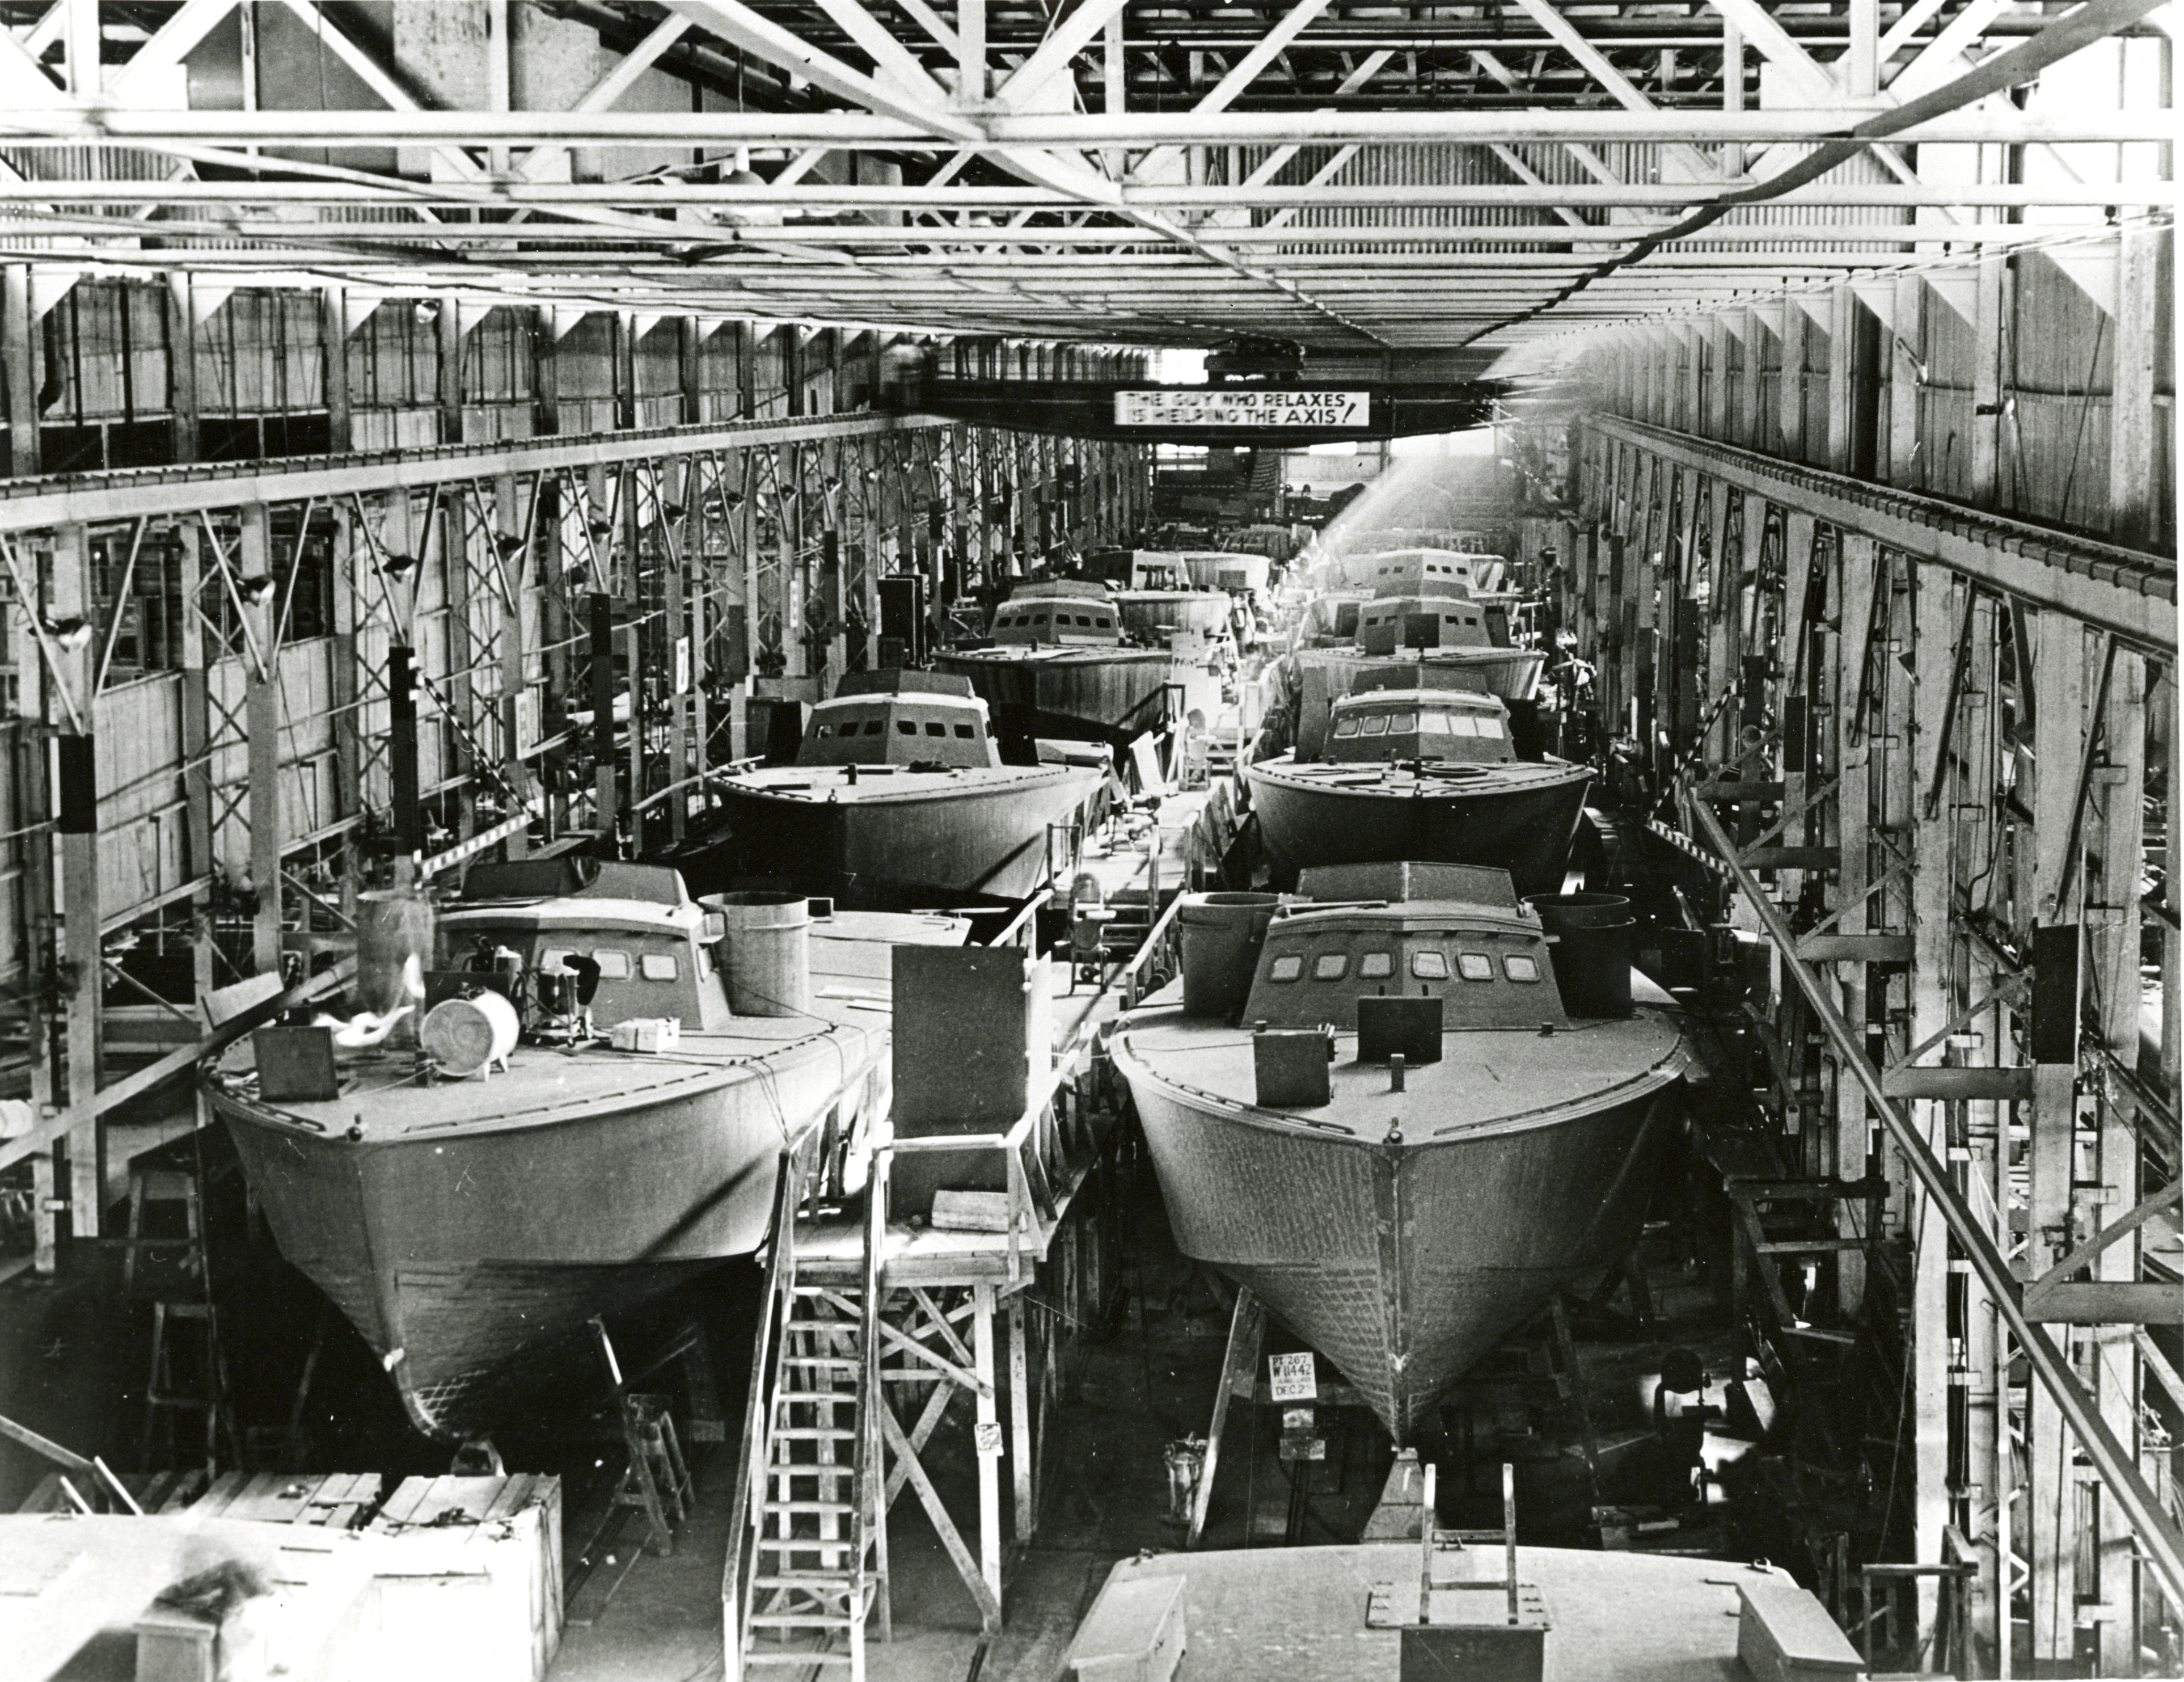 VIEW OF A HIGGINS BOAT ASSEMBLY LINE IN LOUISIANA